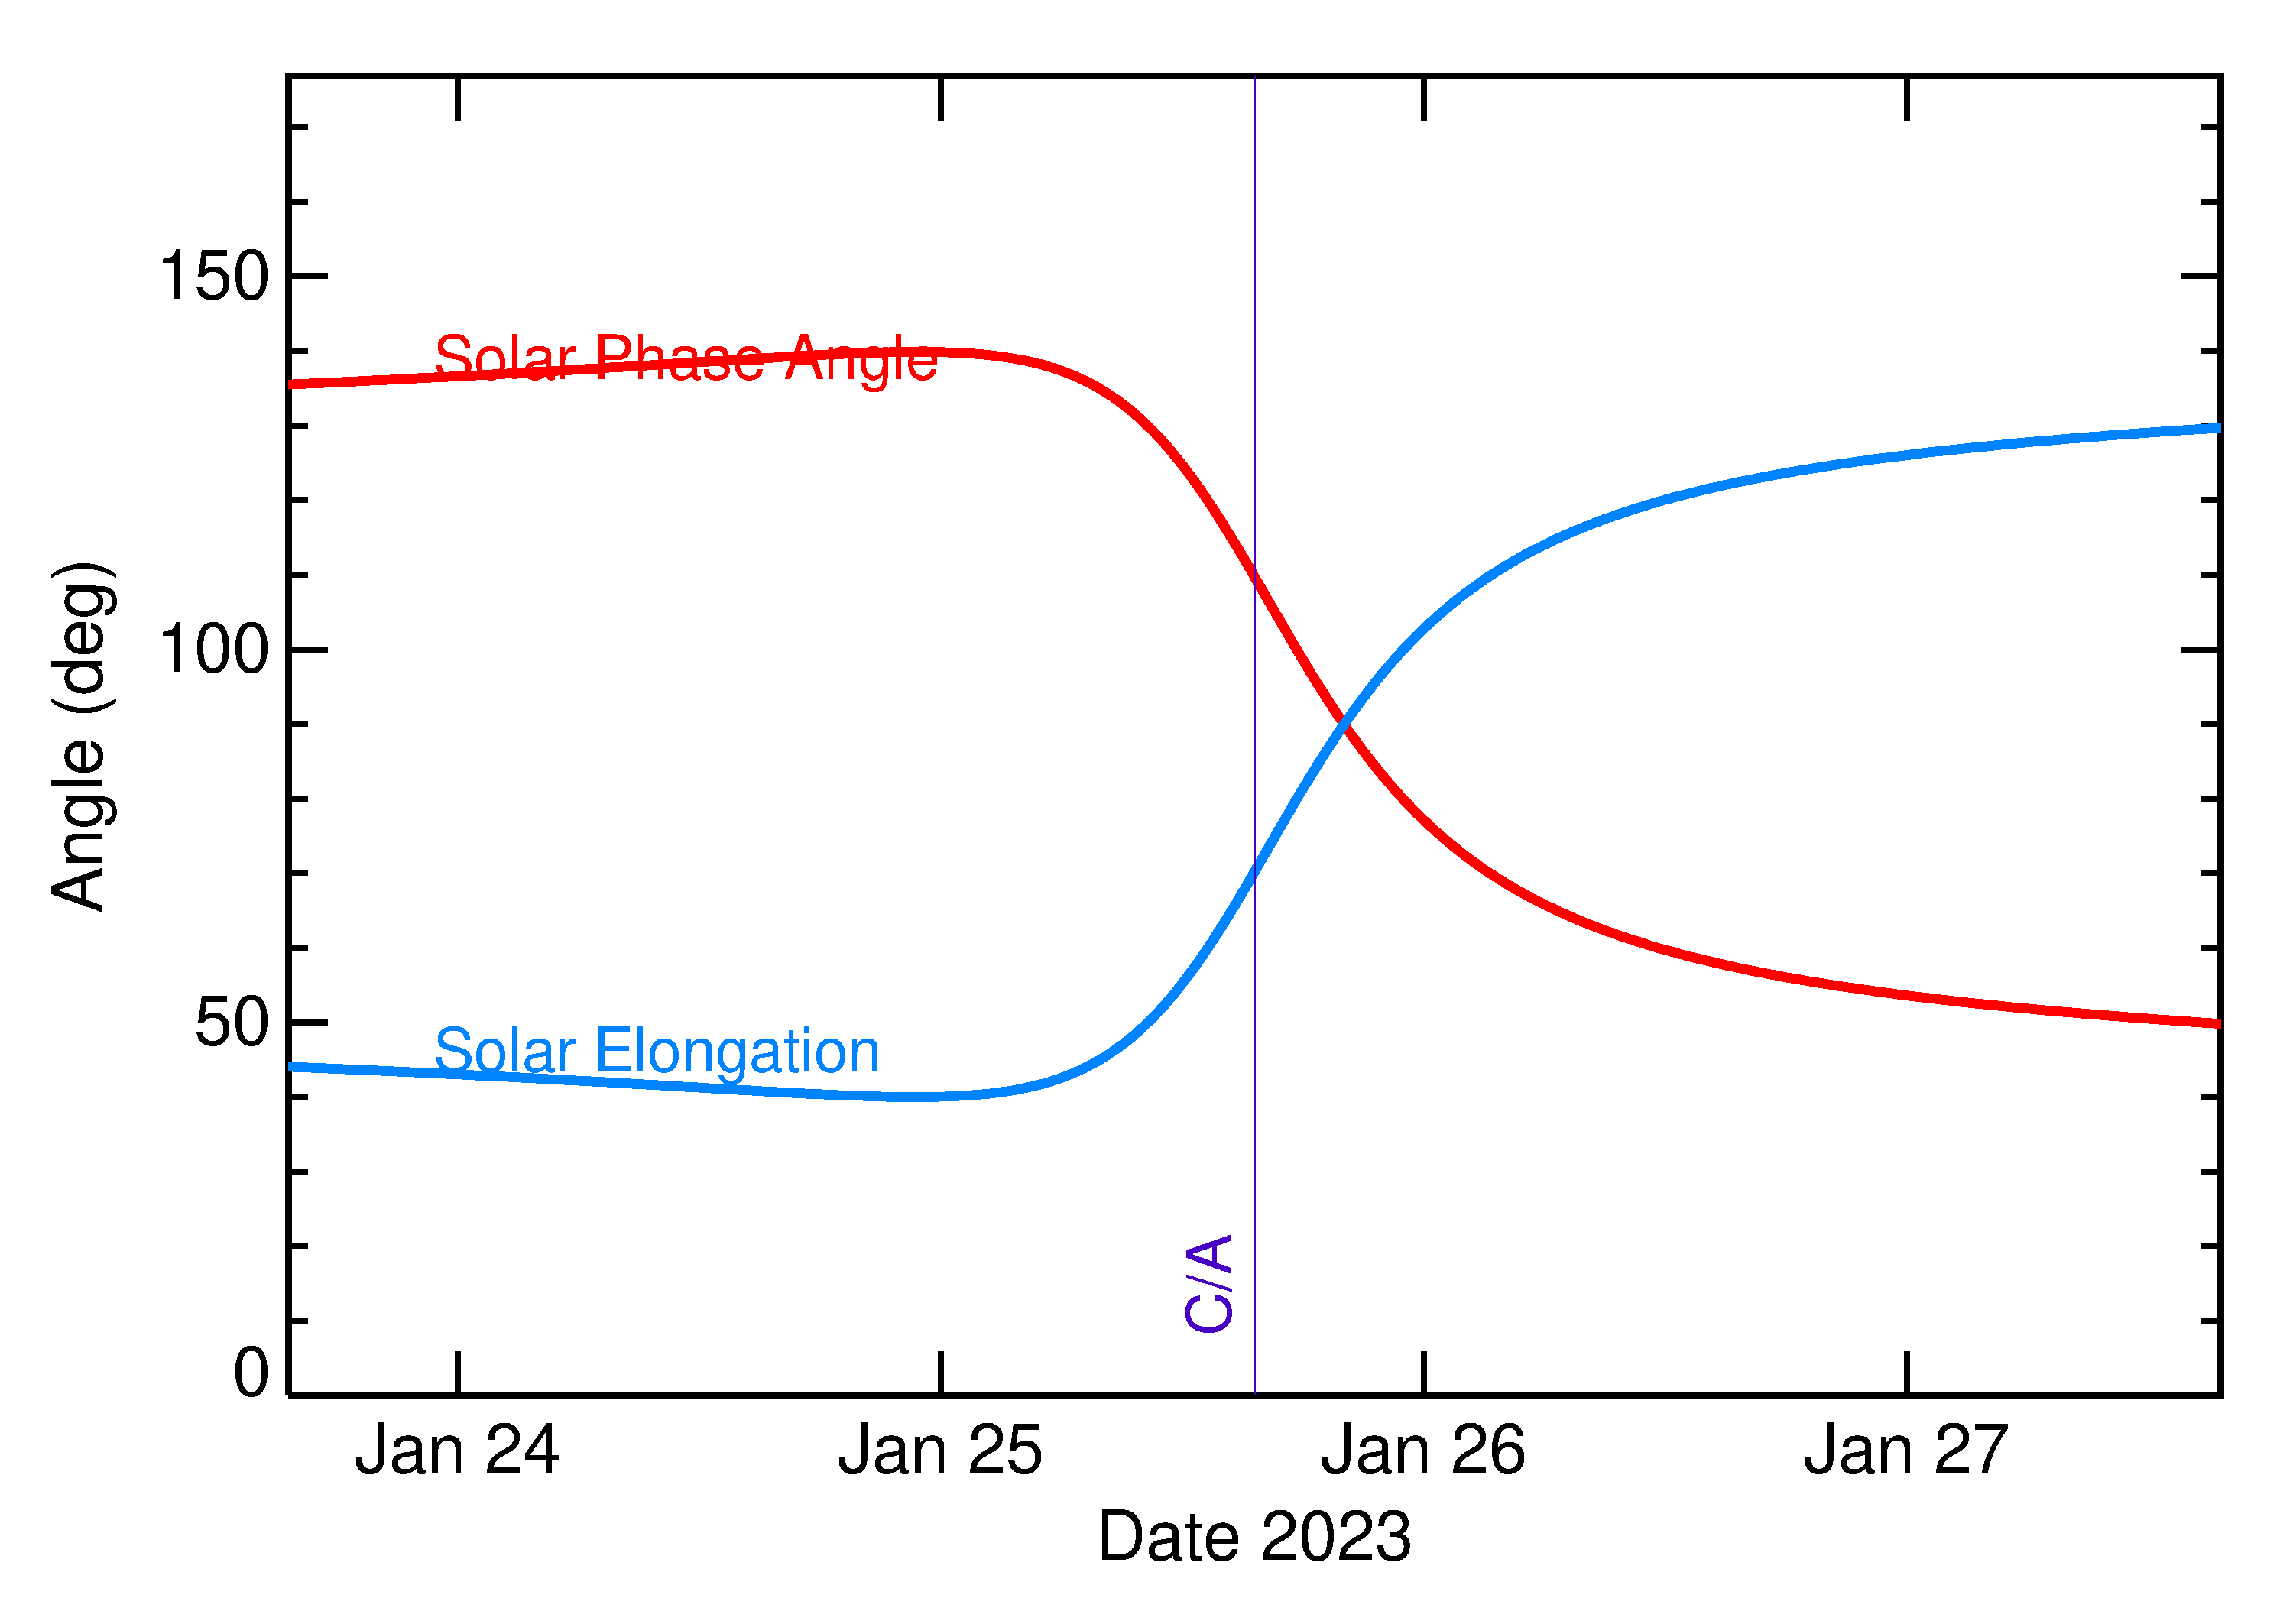 Solar Elongation and Solar Phase Angle of 2023 BX5 in the days around closest approach